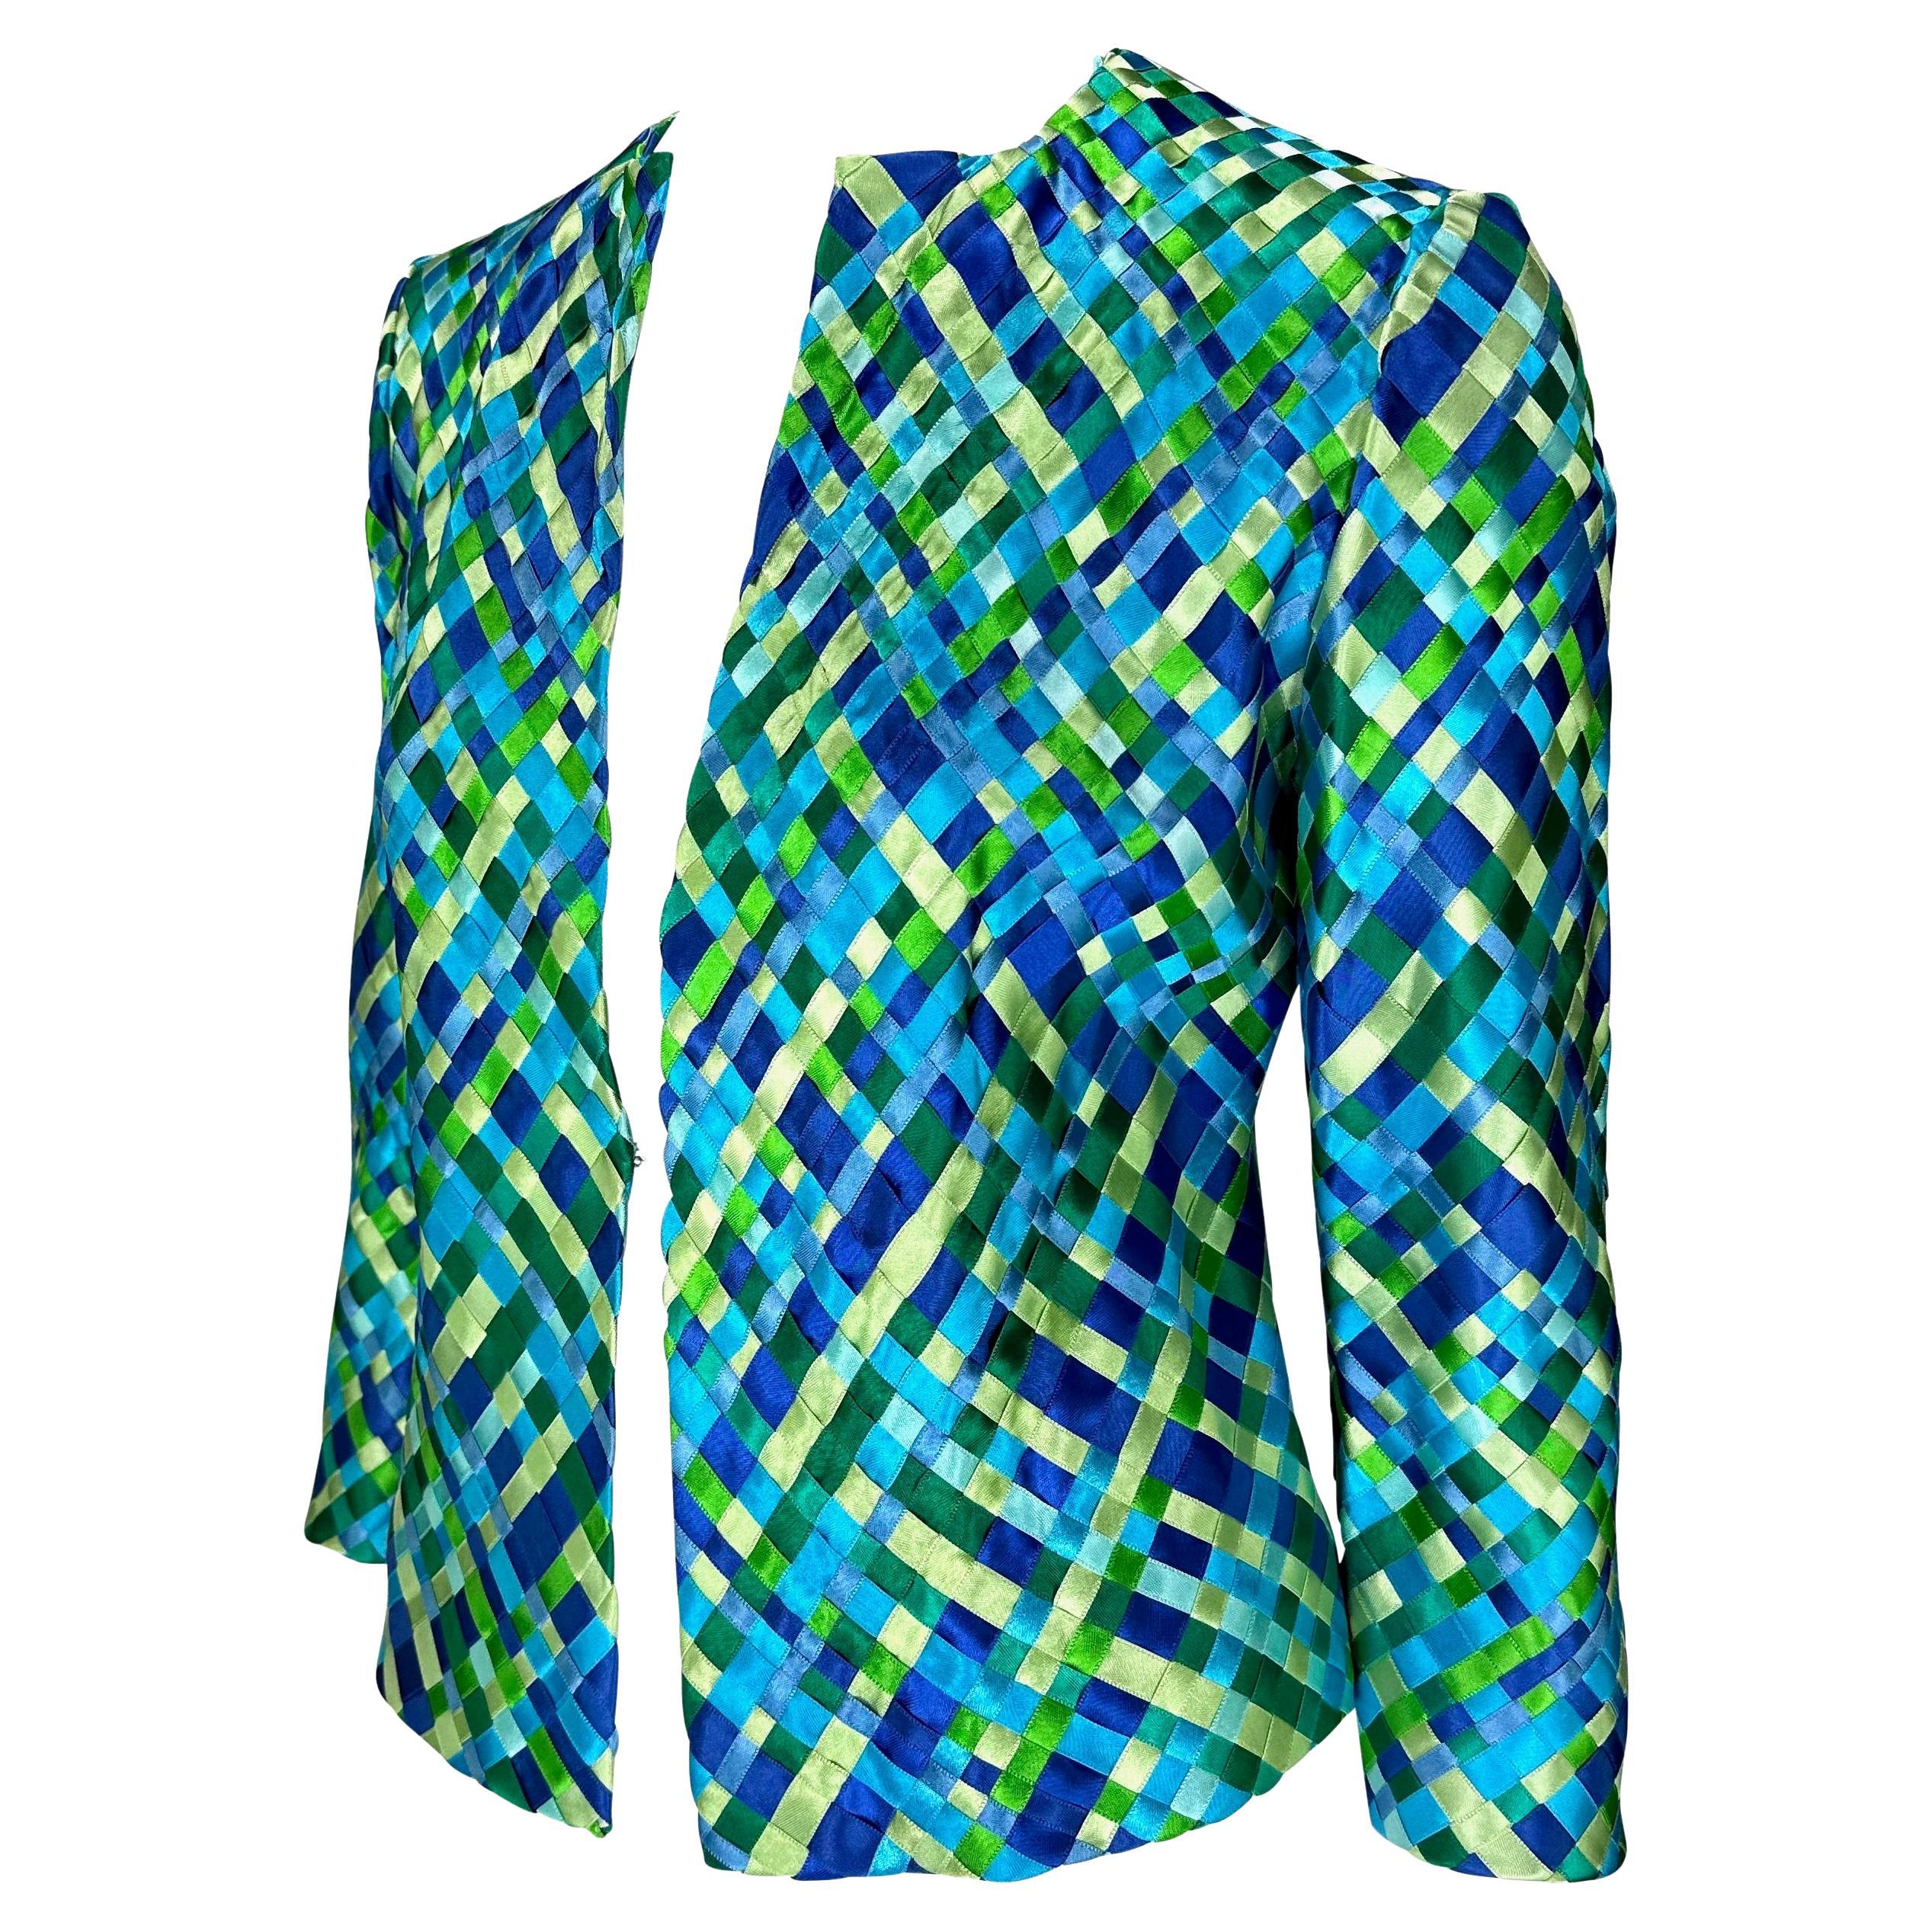 S/S 2002 Dolce & Gabbana Runway Blue Green Satin Woven Ribbon Jacket In Excellent Condition For Sale In West Hollywood, CA